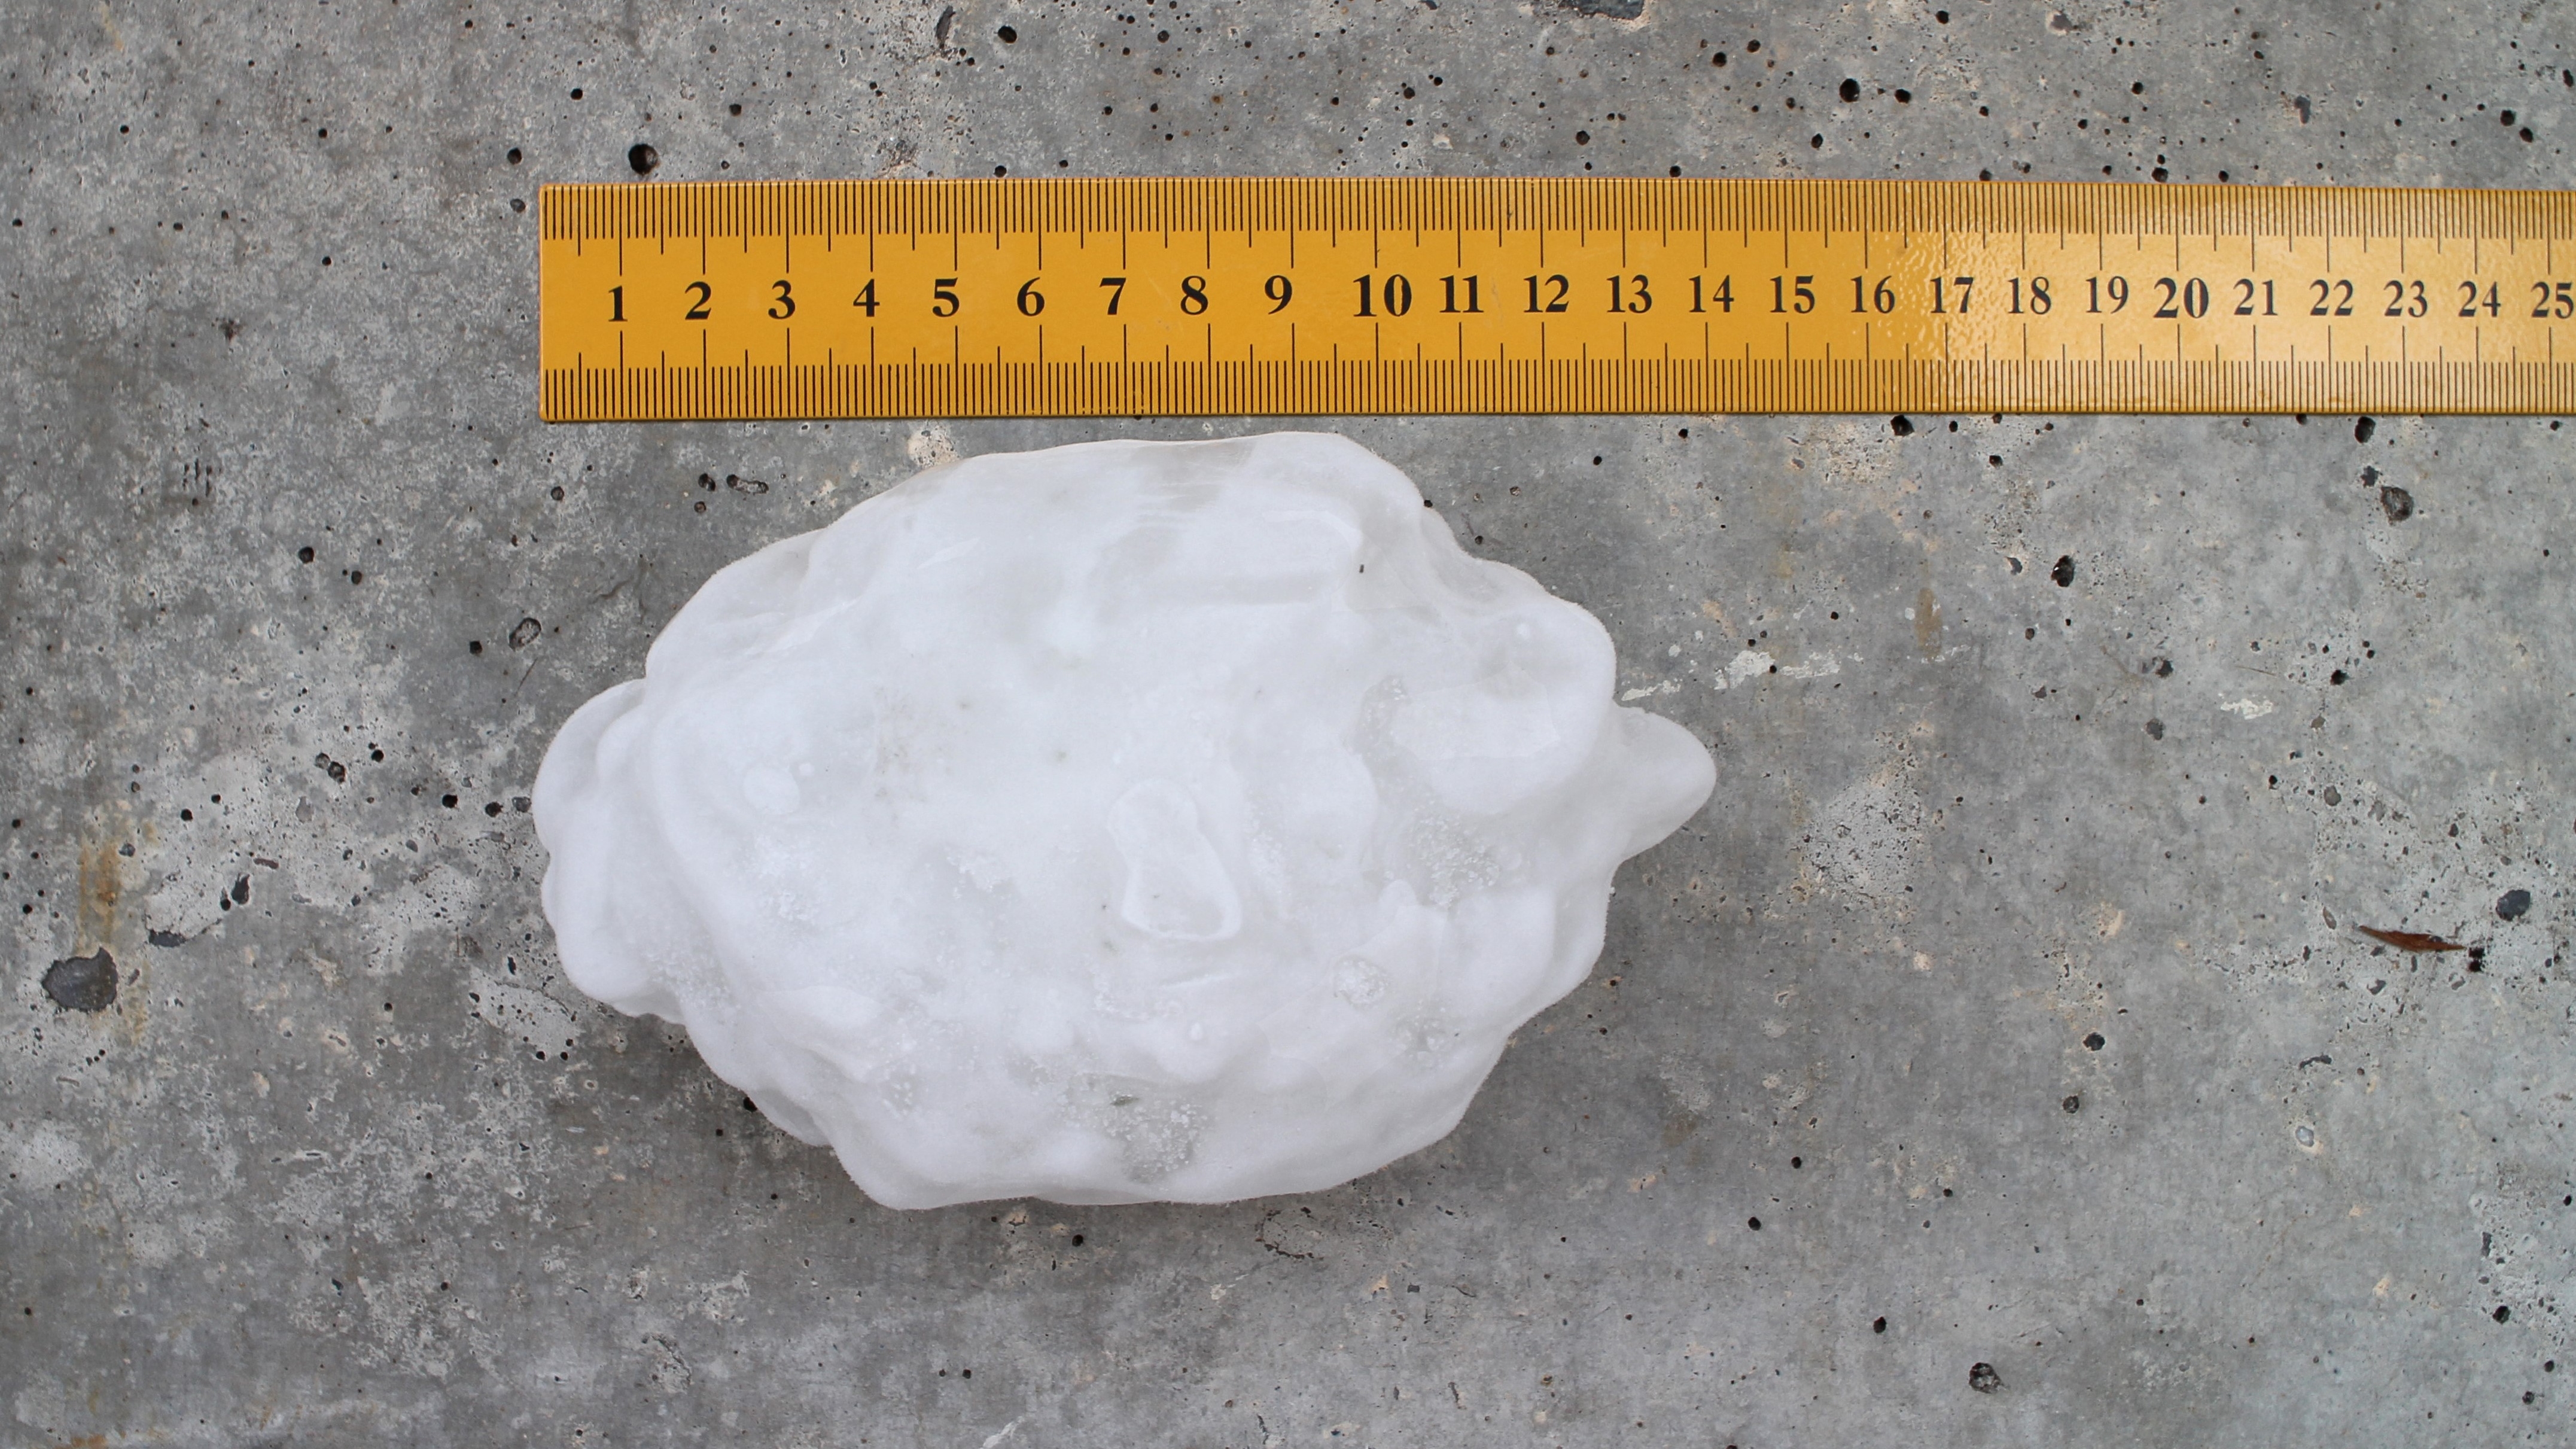 Hail – An underestimated and growing risk